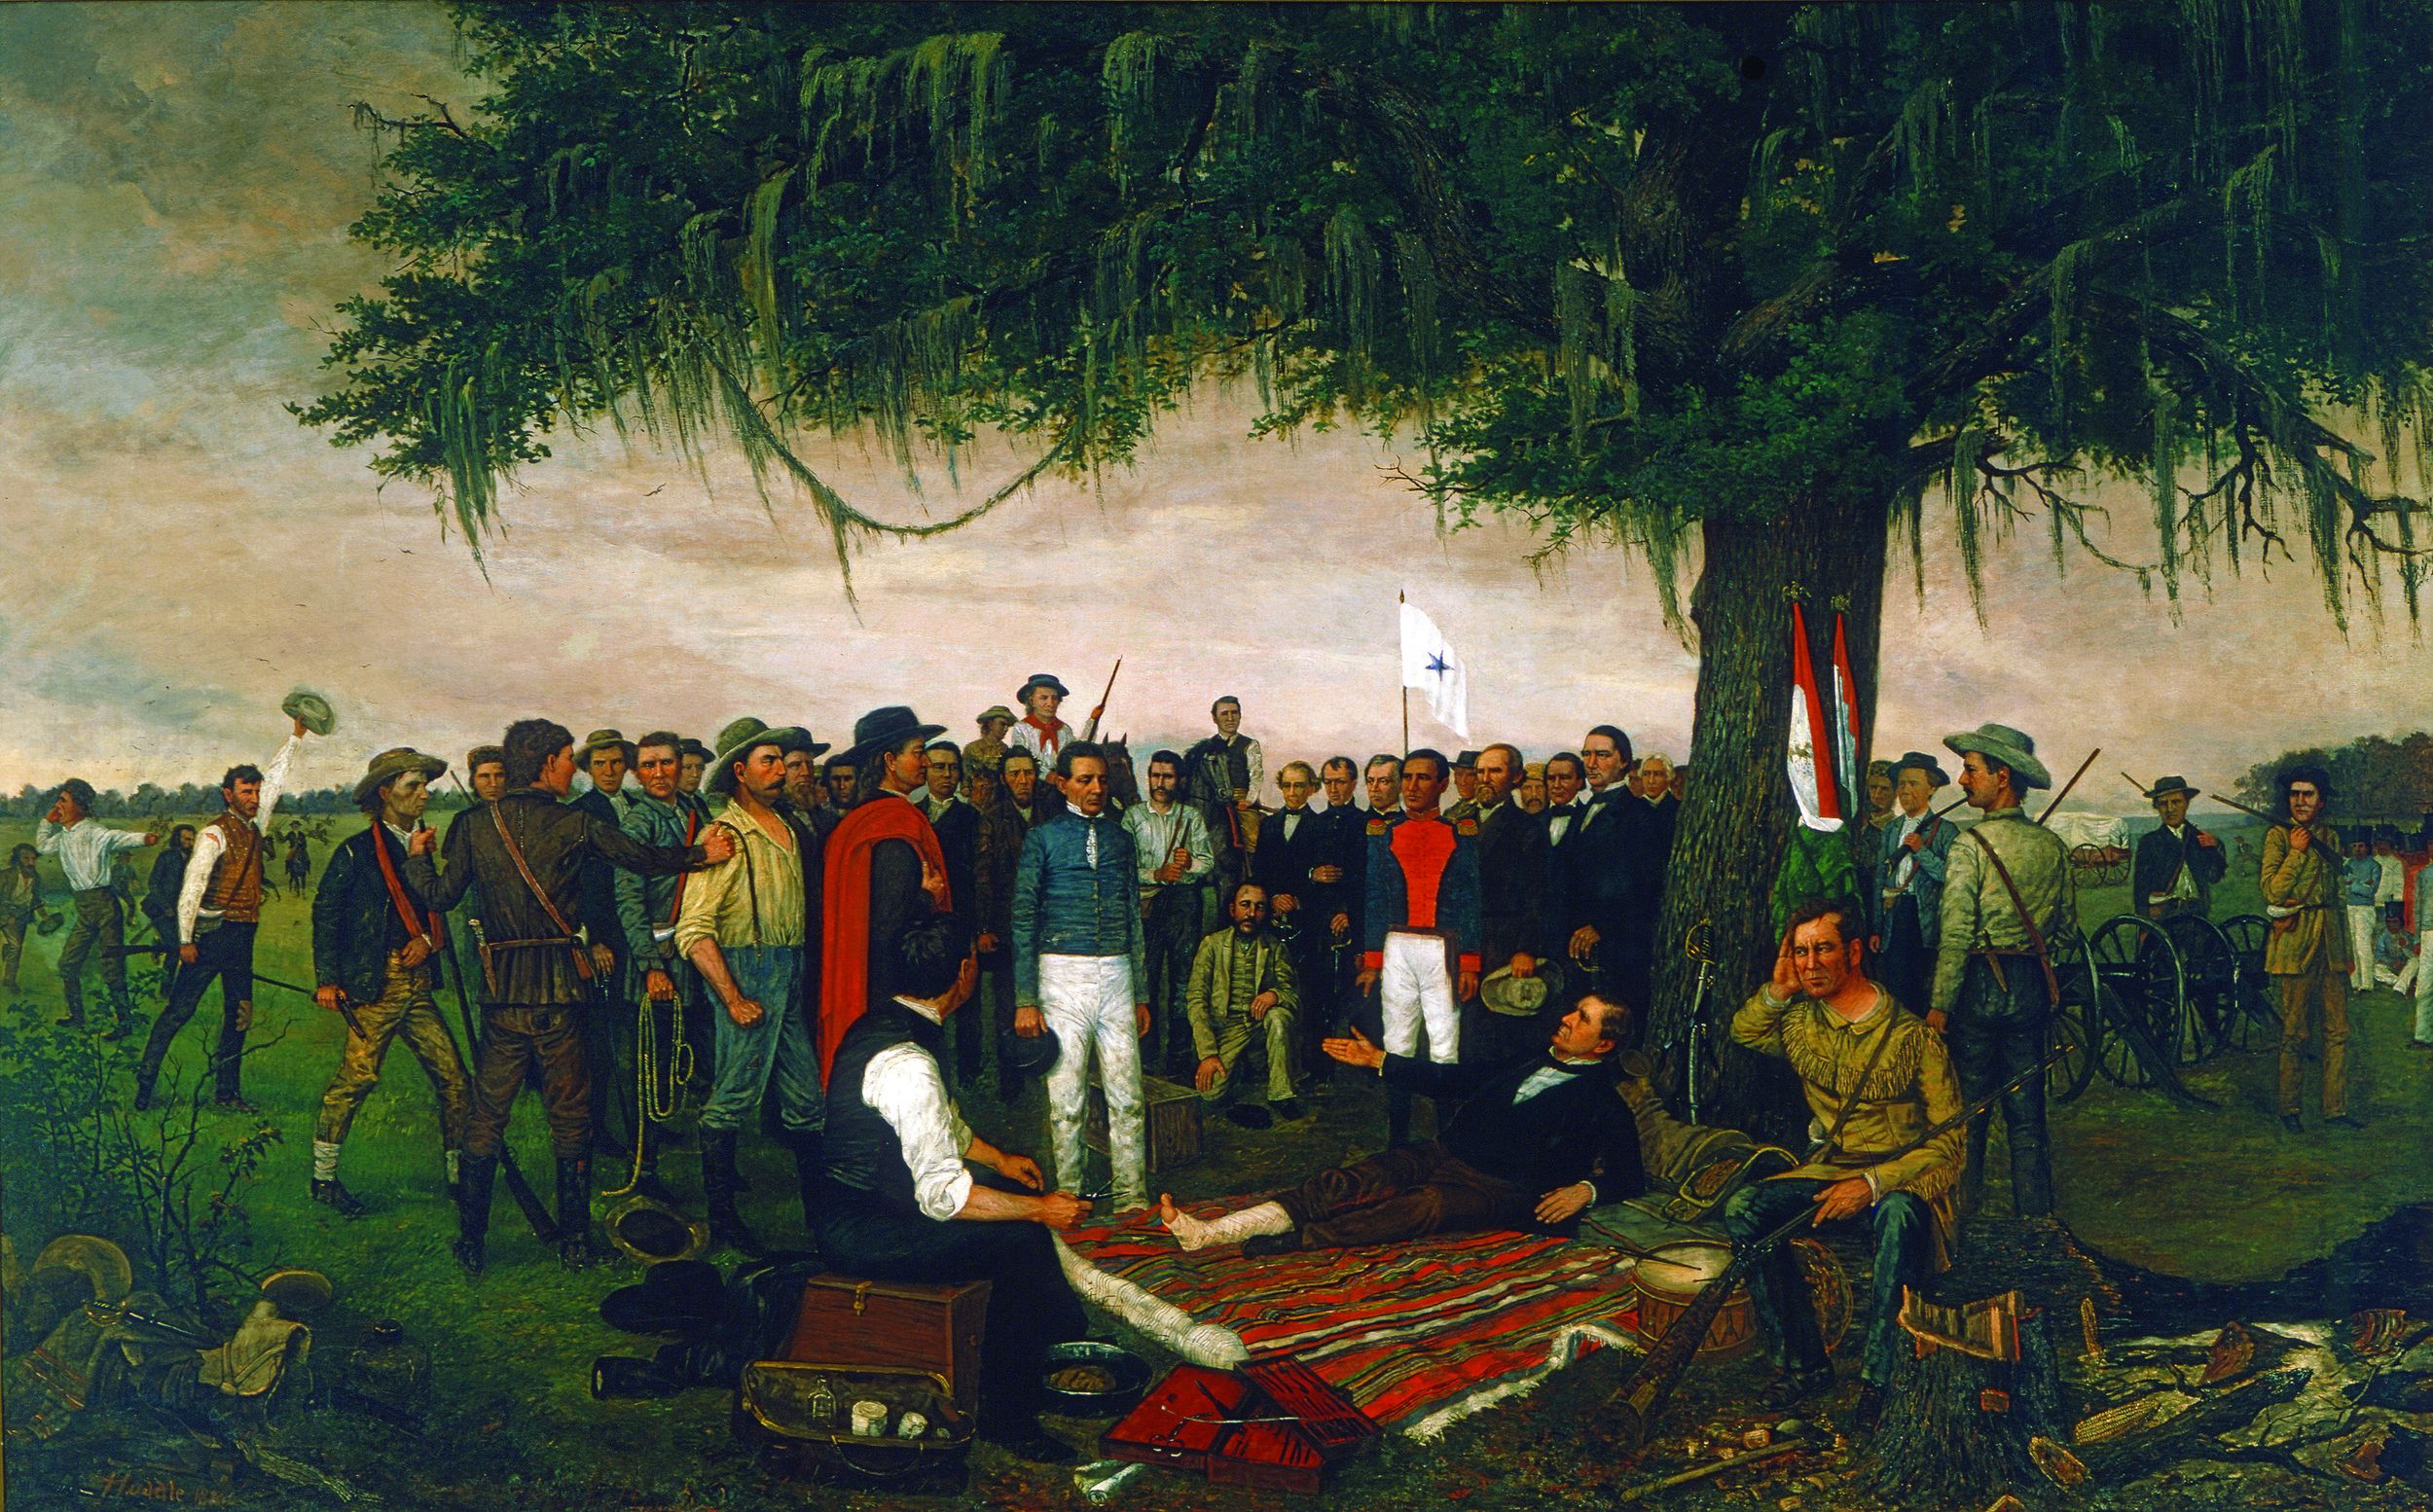 An abashed Santa Anna, hat in hand, surrenders to the wounded Sam Houston after the Battle of San Jacinto. Painting by William Huddle.